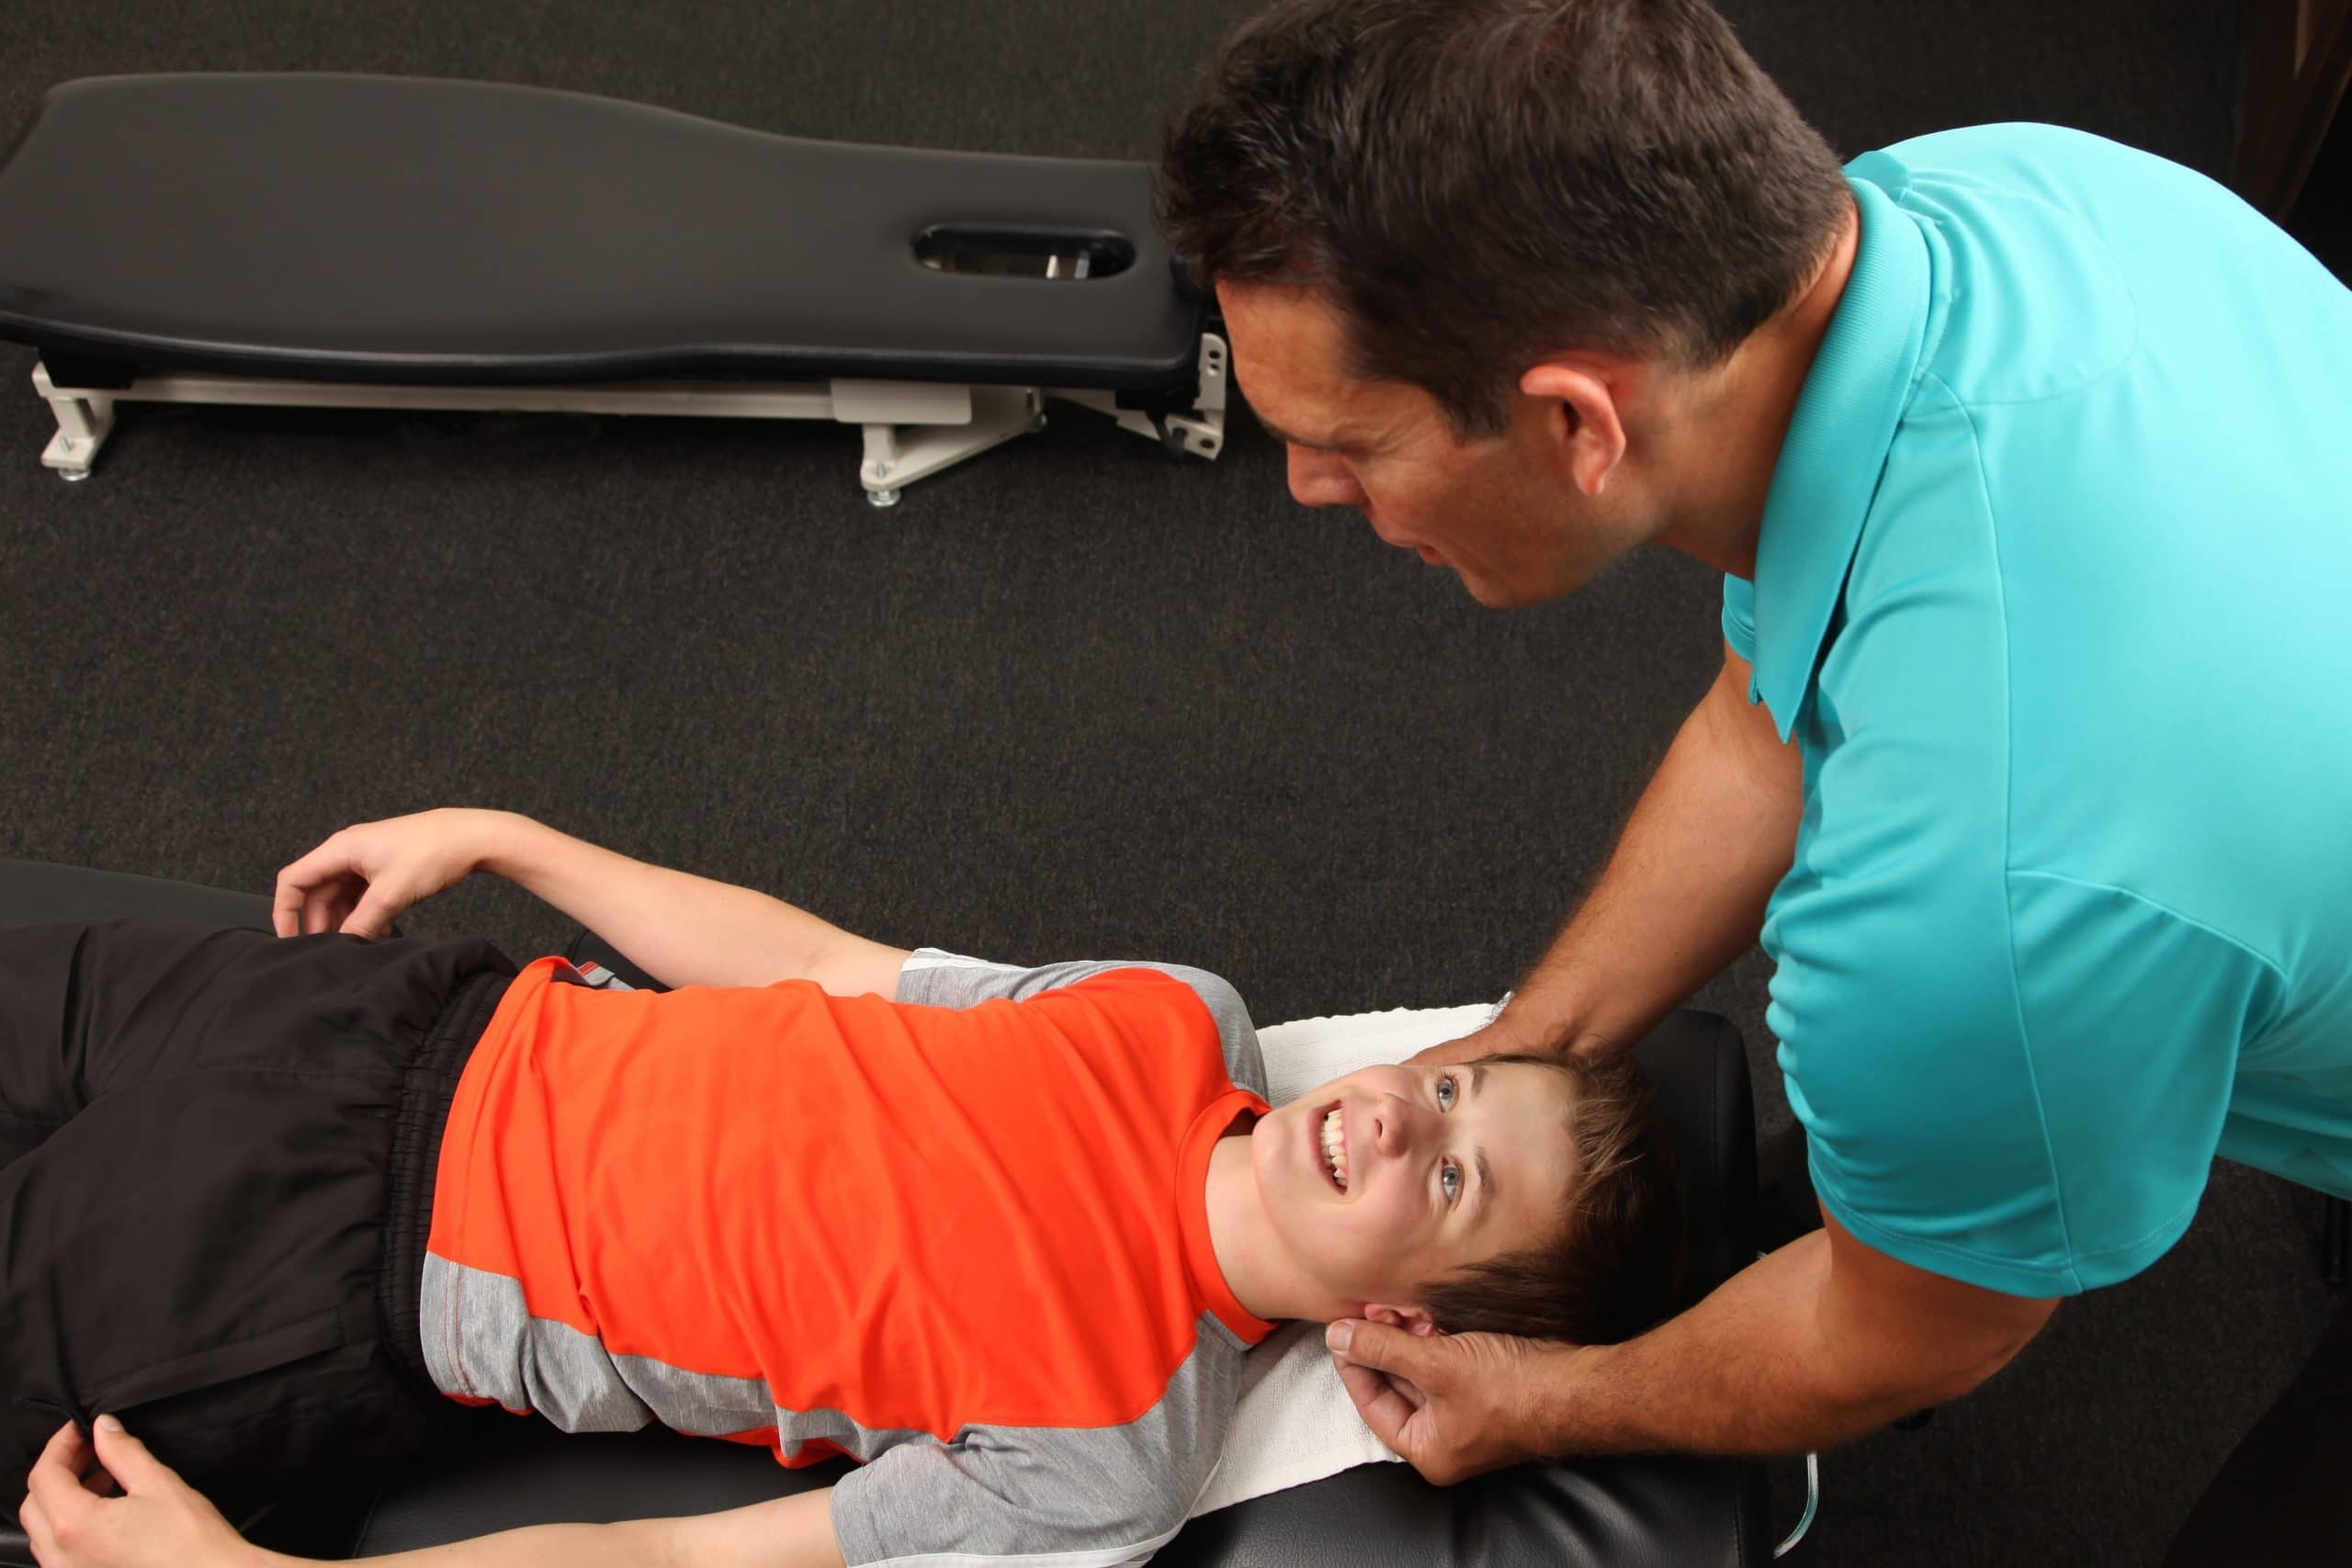 How to Get a Child Ready for Their First Chiropractic Visit